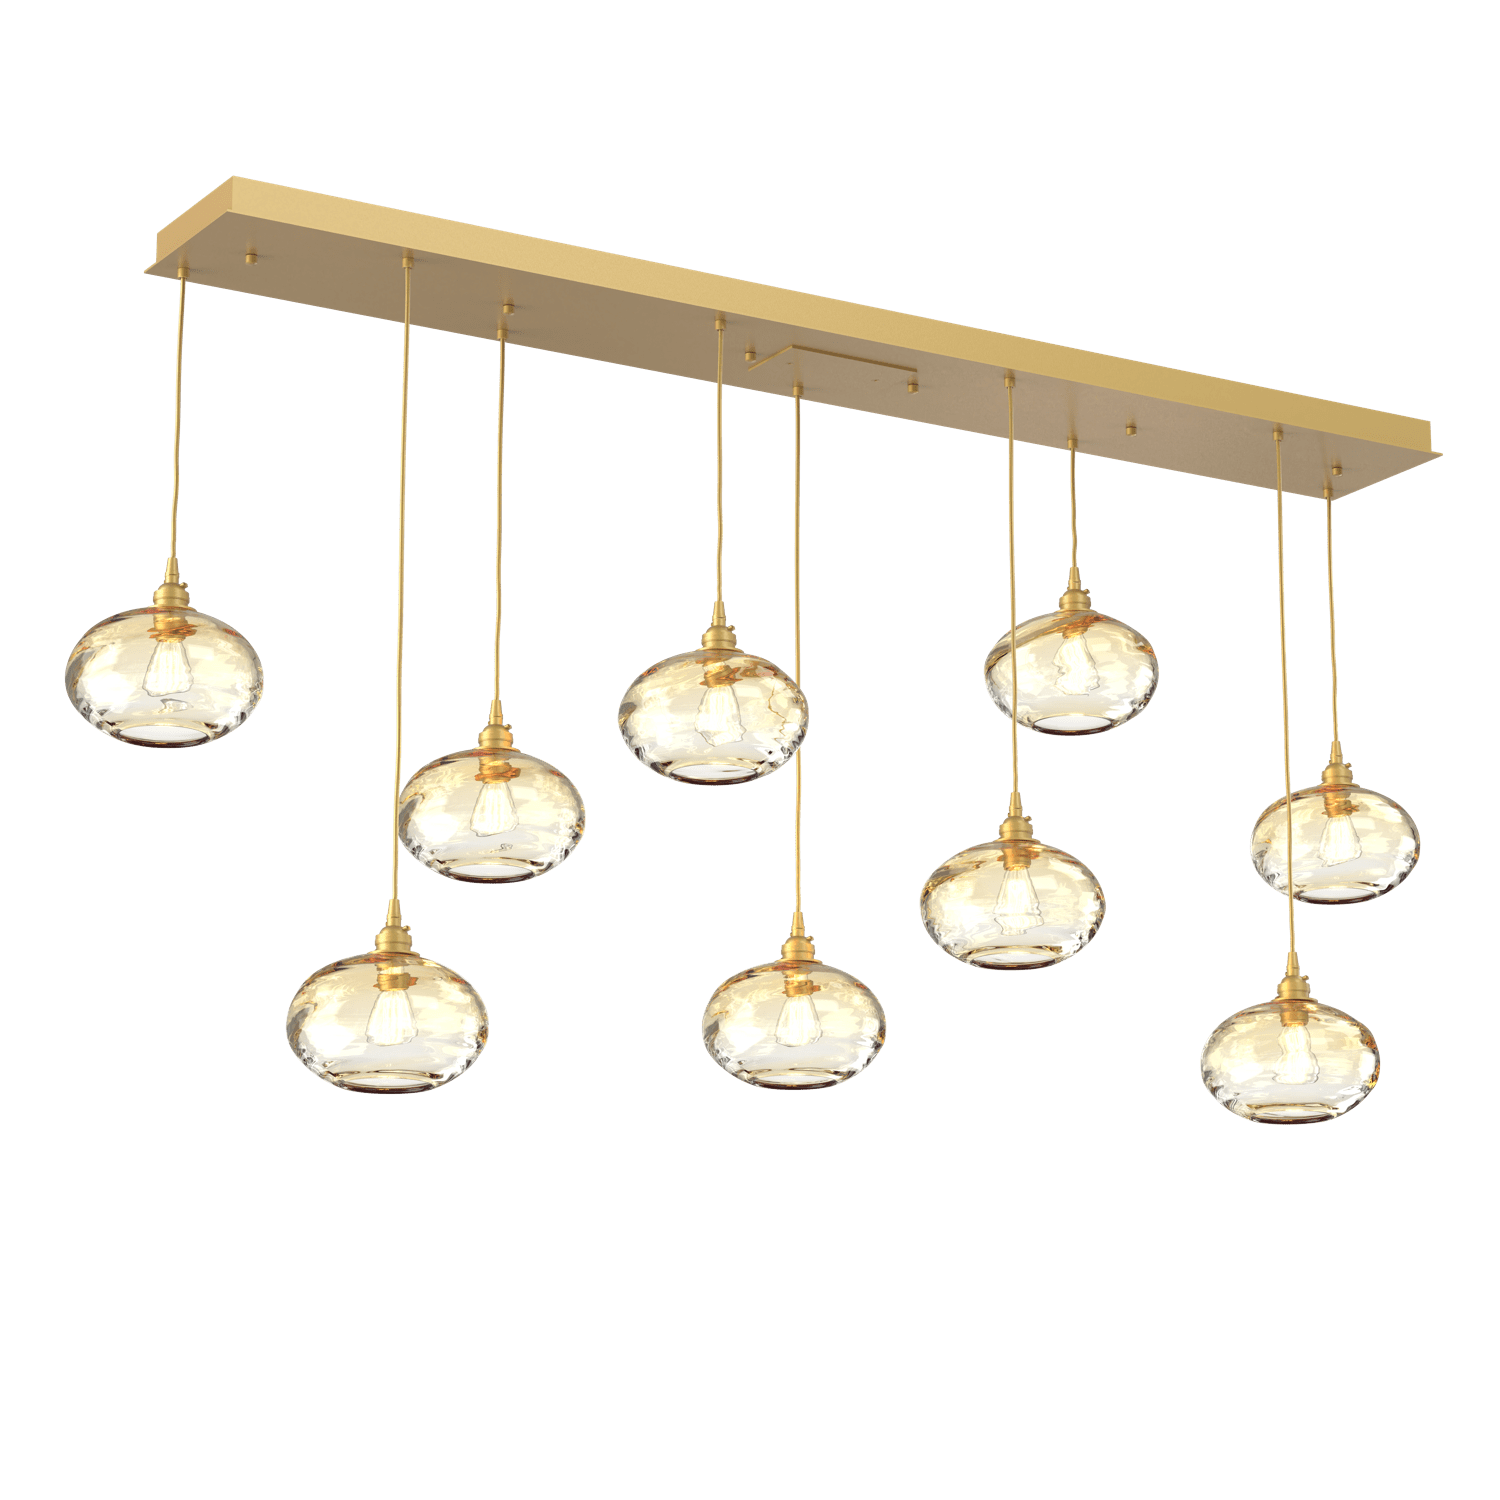 PLB0036-09-GB-OA-Hammerton-Studio-Optic-Blown-Glass-Coppa-9-light-linear-pendant-chandelier-with-gilded-brass-finish-and-optic-amber-blown-glass-shades-and-incandescent-lamping